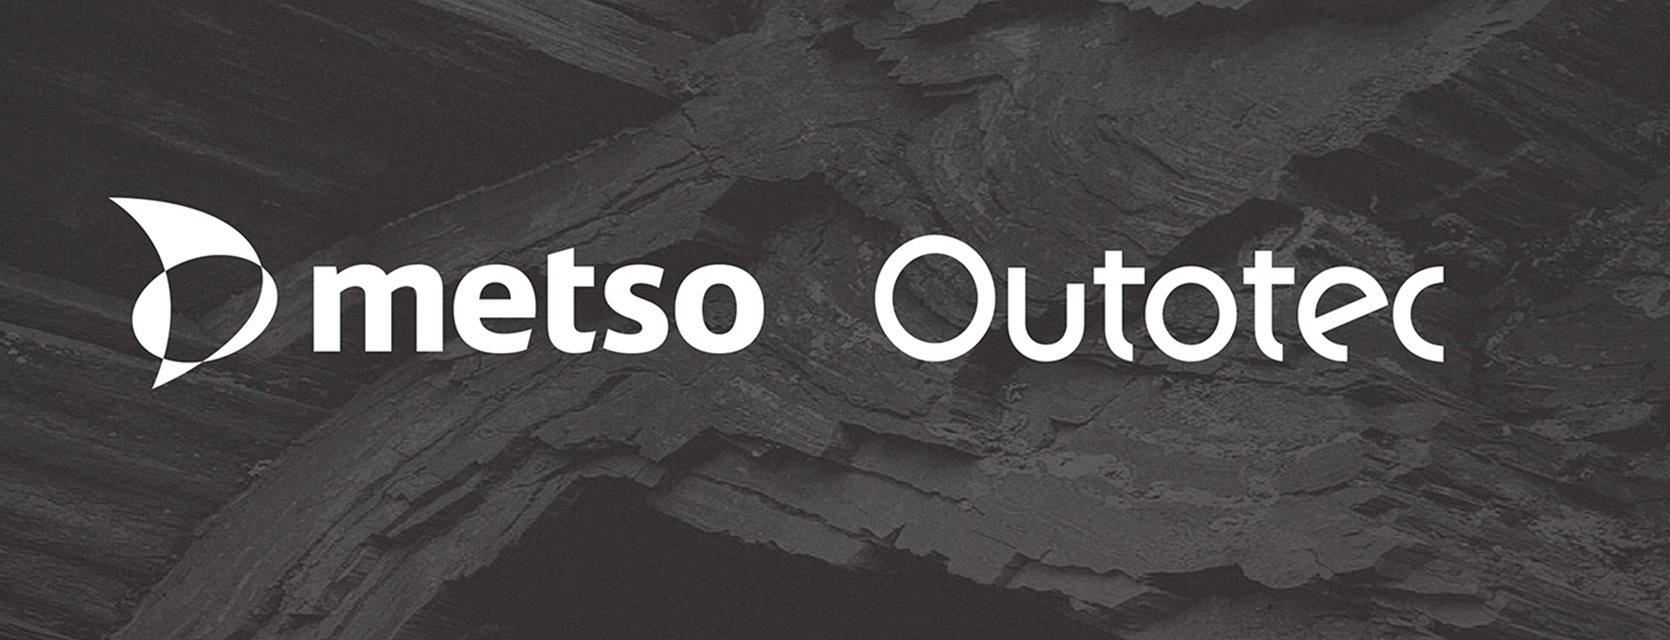 The Finnish Financial Supervisory Authority has approved a supplement to the prospectus prepared for the combination of Outotec and the Metso Minerals Business